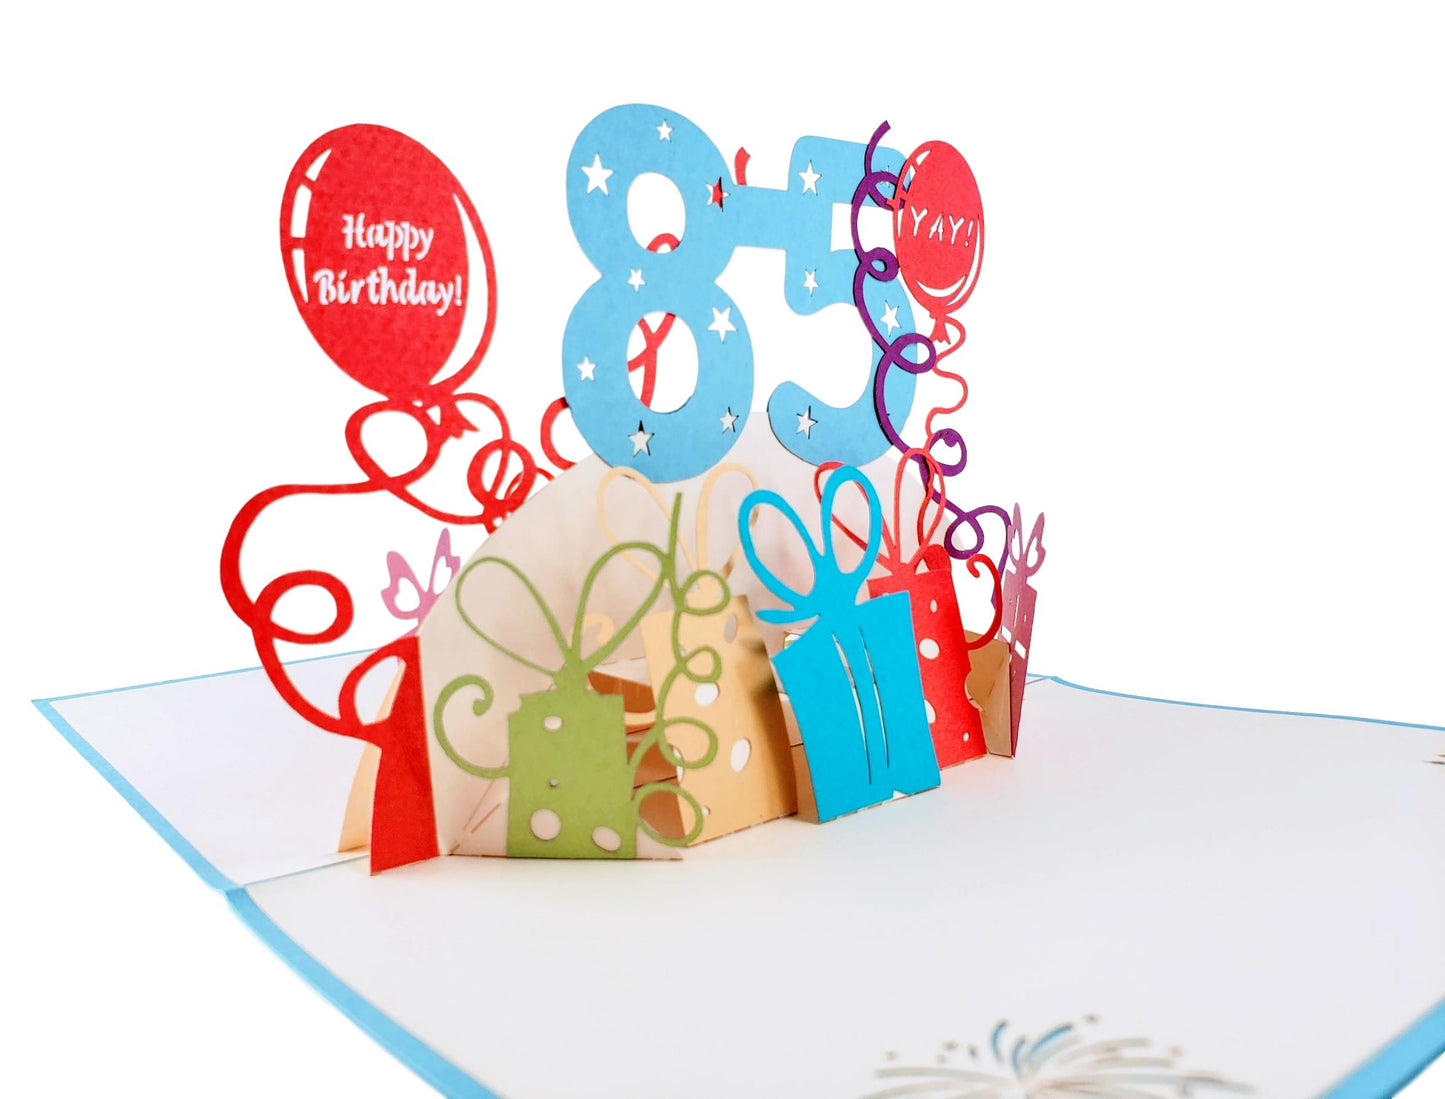 Happy 85th Birthday With Lots of Presents 3D Pop Up Greeting Card - Age - best deal - Birthday - iGifts And Cards